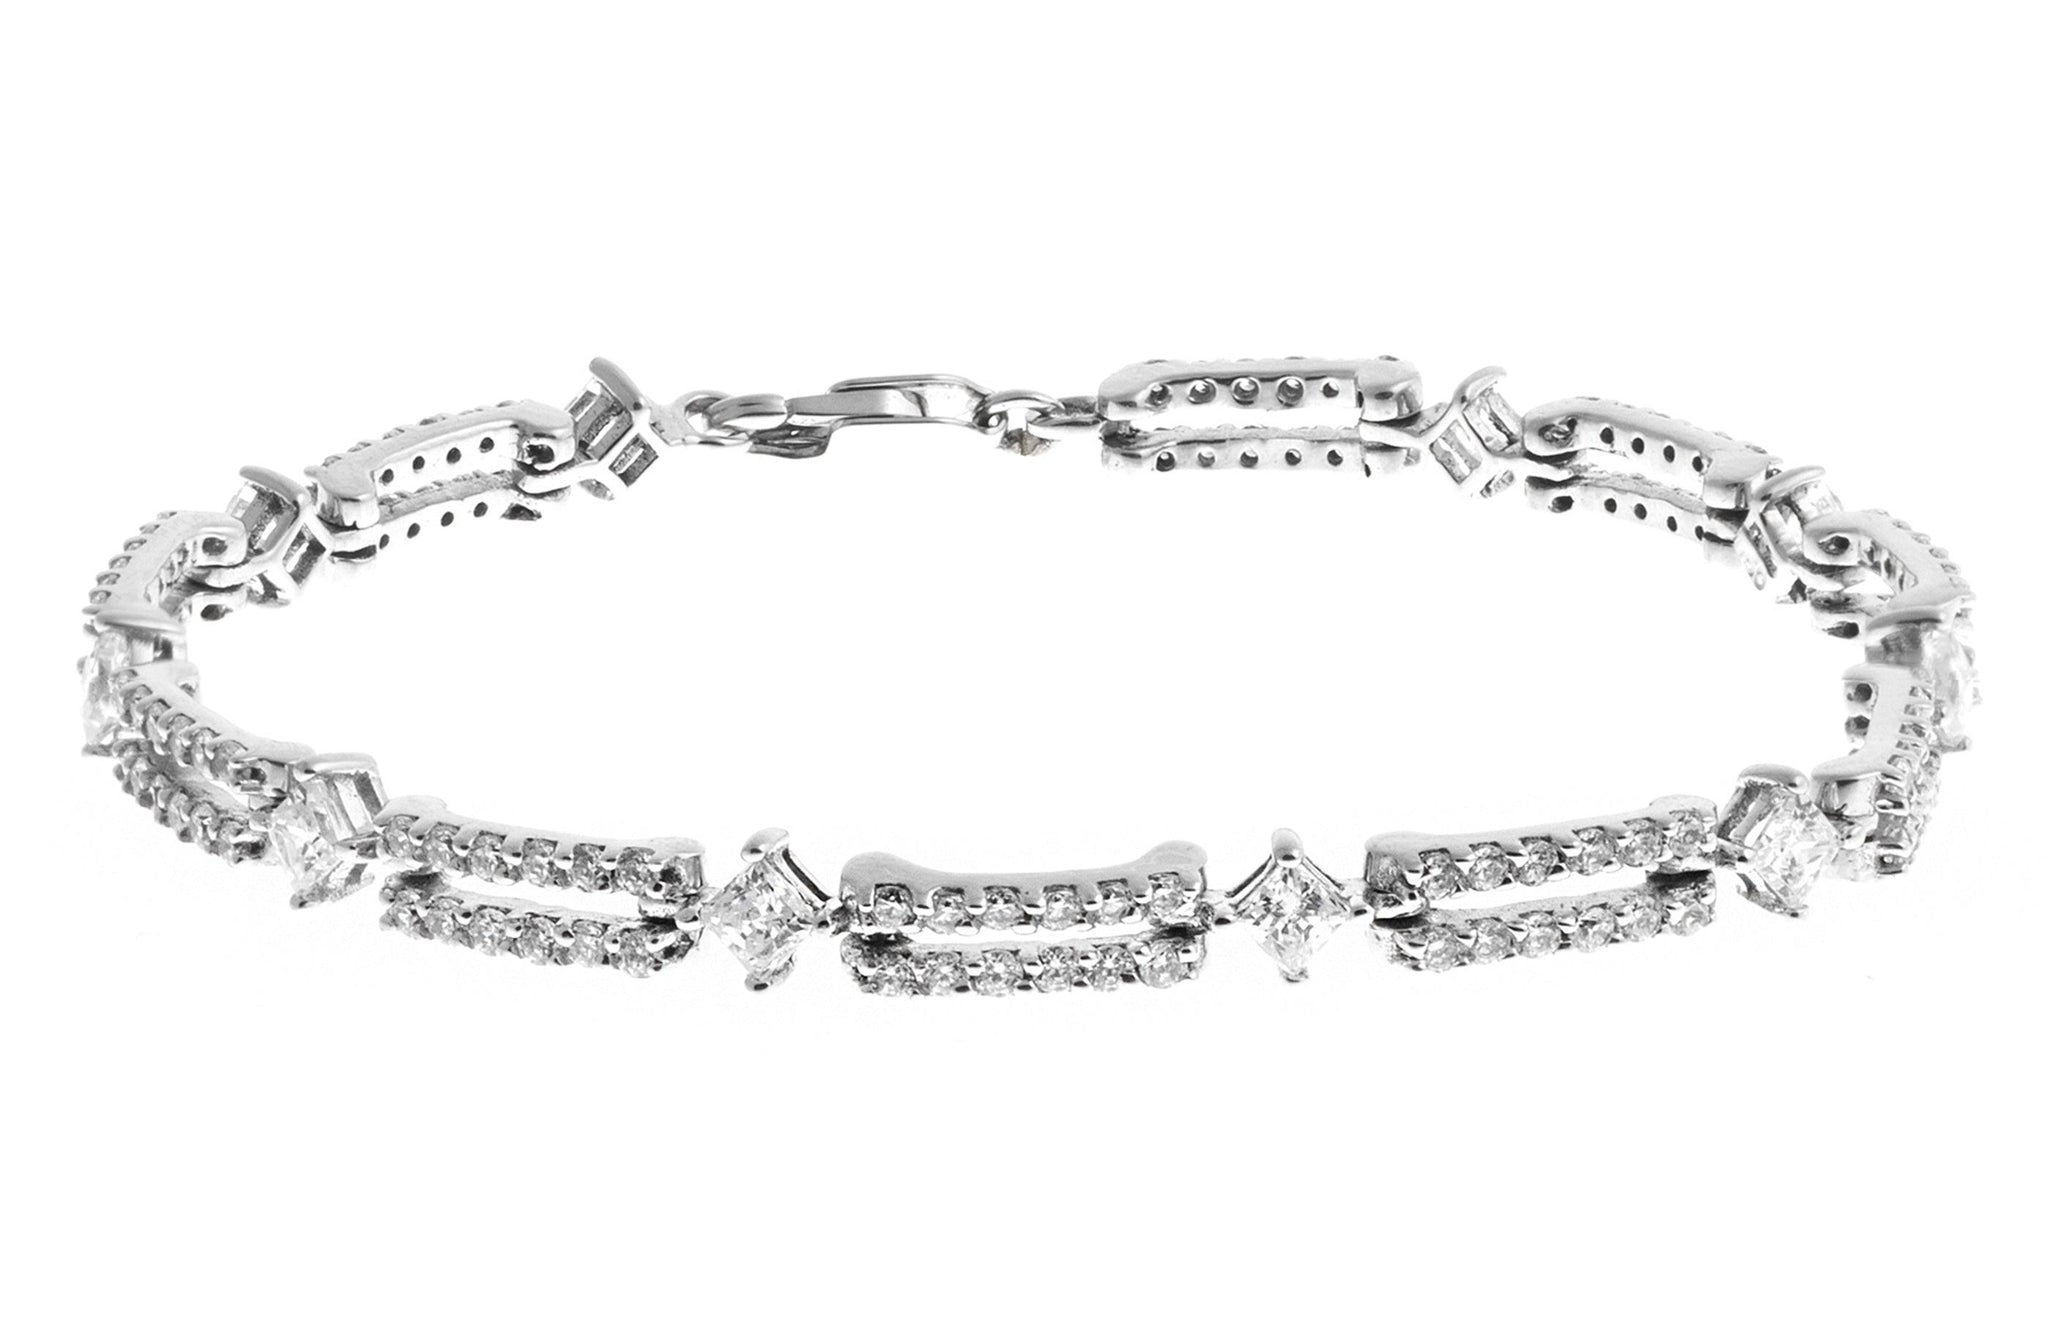 18ct White Gold Bracelet with Cubic Zirconia Stones (13.3g) LBR-1162